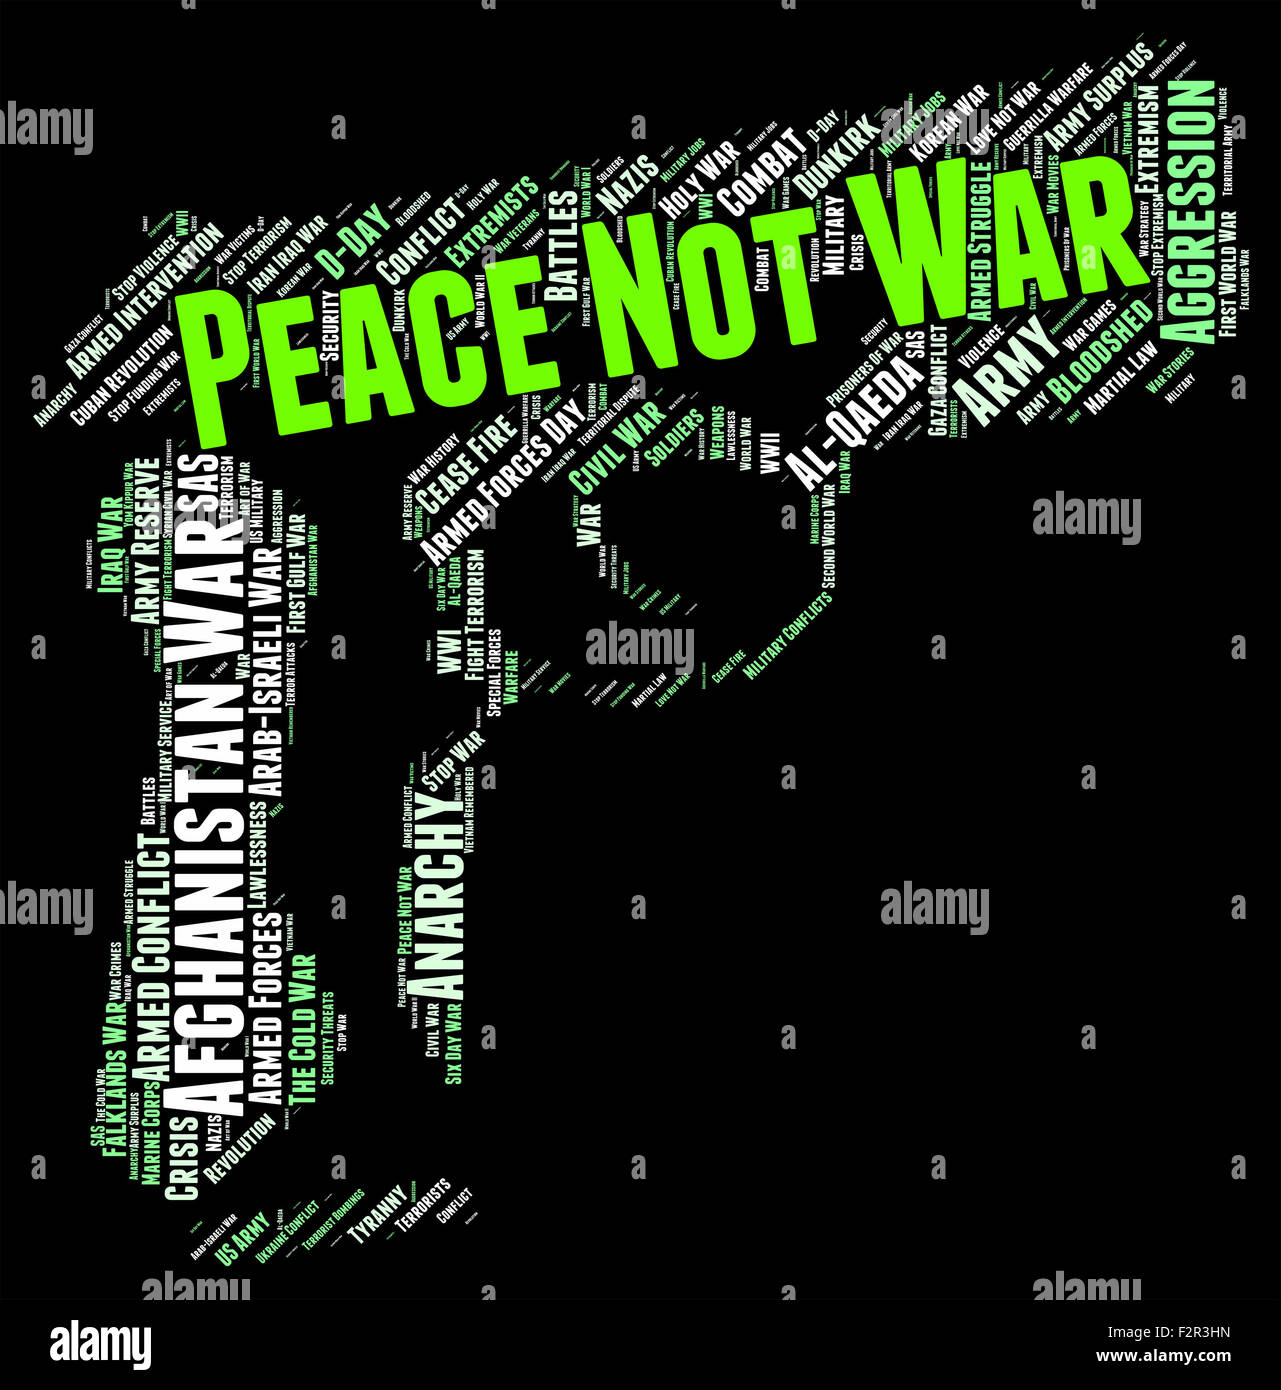 Peace Not War Meaning Military Action And Fight Stock Photo